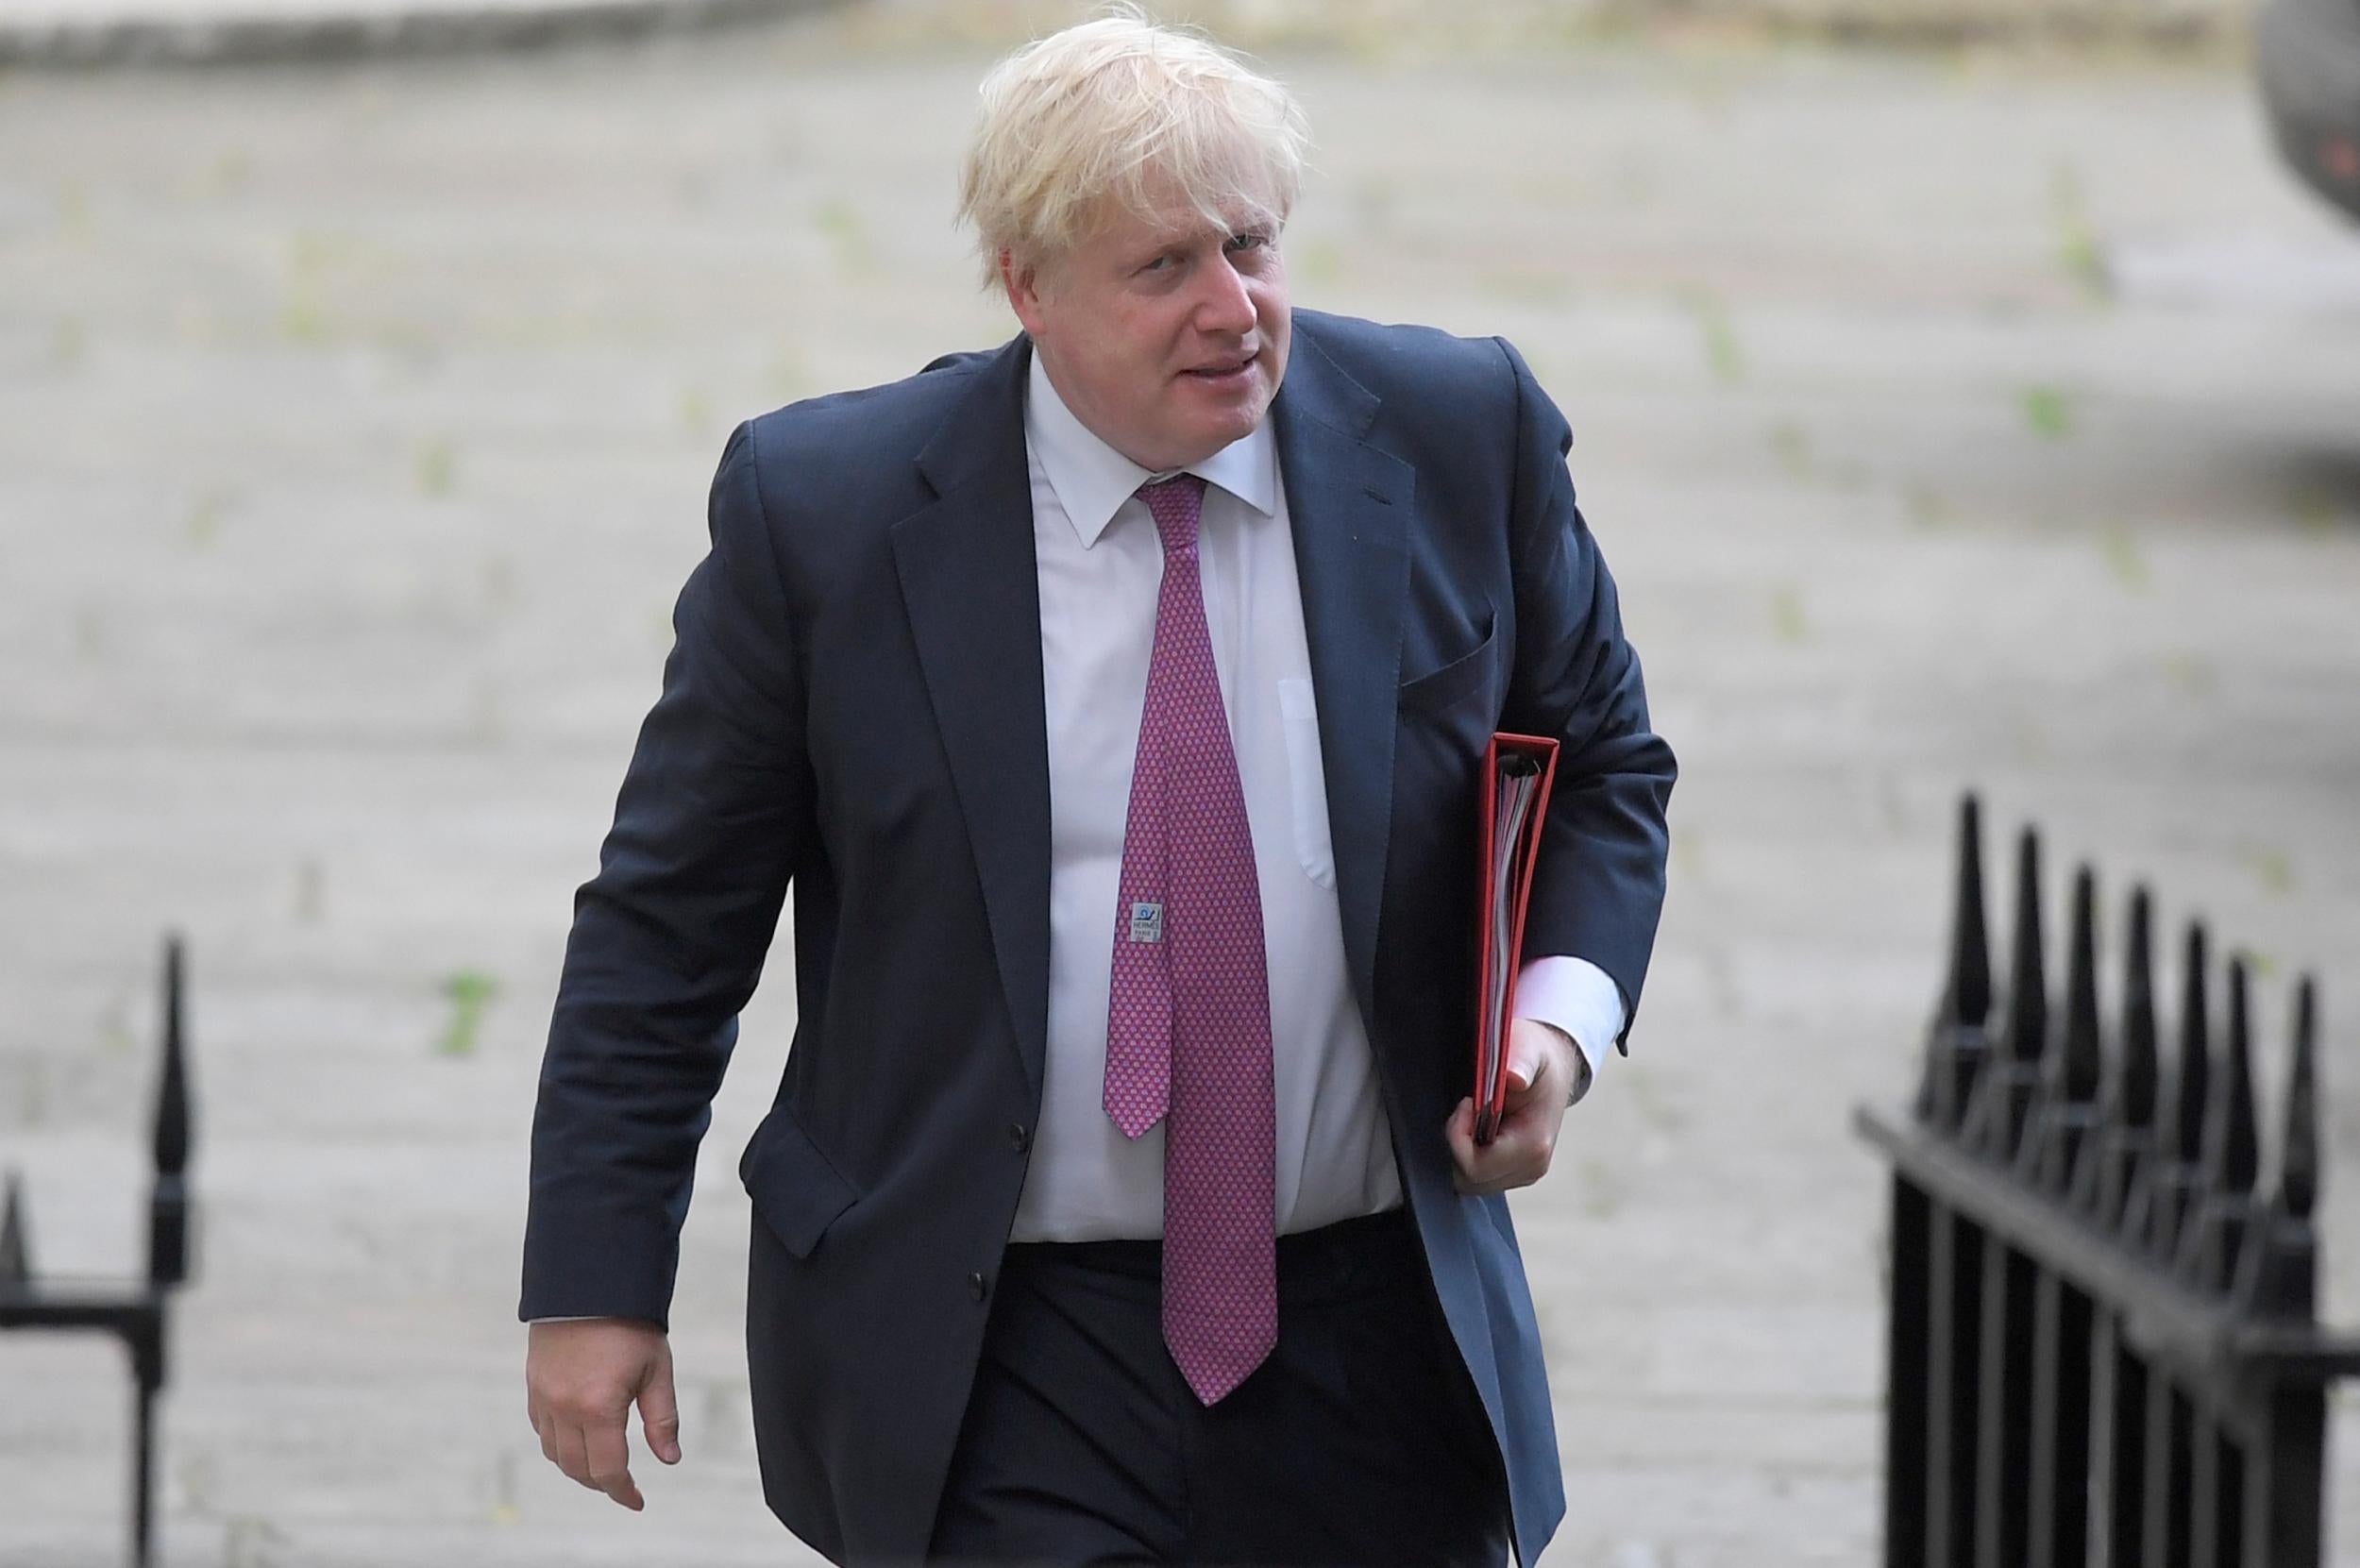 Thanks to Boris Johnson and his chums, consumers are feeling real fear